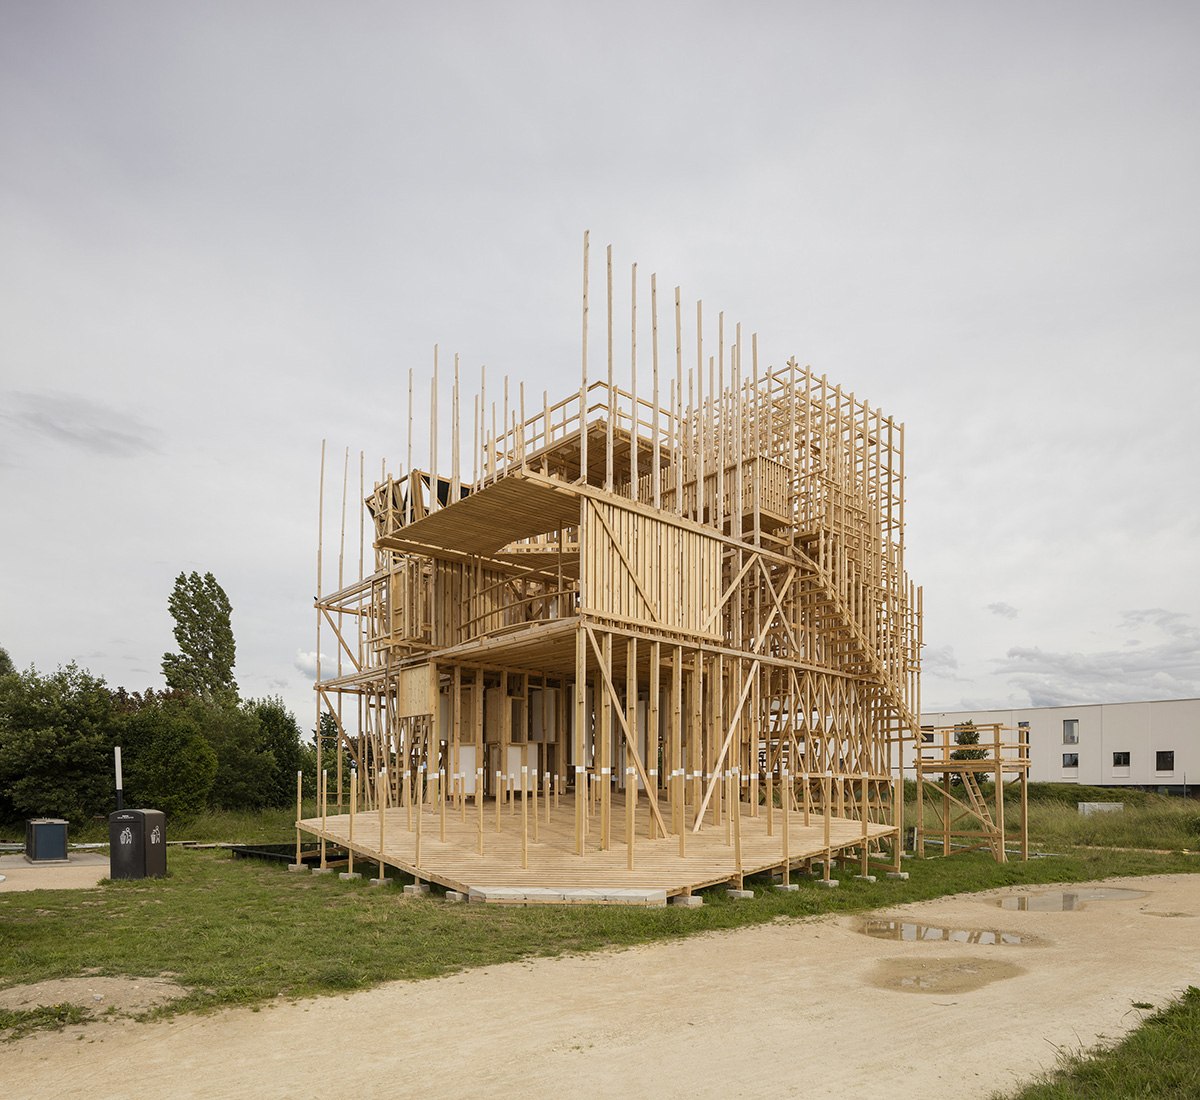 HOUSE 1 at EPFL campus in Laussana. Photograph © Dylan Perrenoud. Image courtesy of Mintlist.